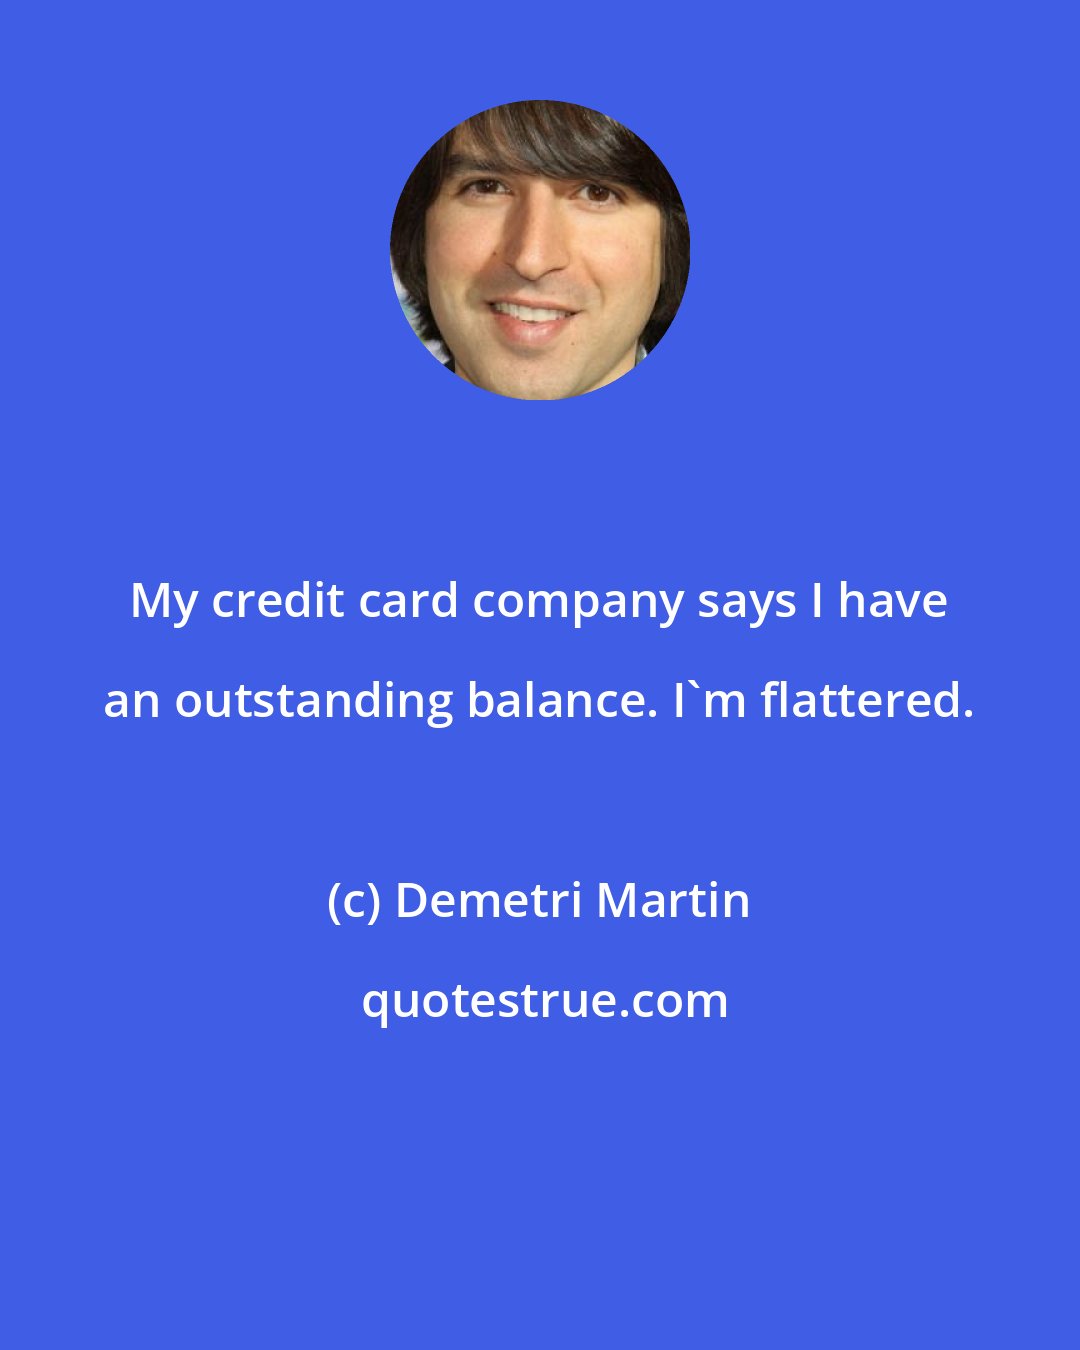 Demetri Martin: My credit card company says I have an outstanding balance. I'm flattered.